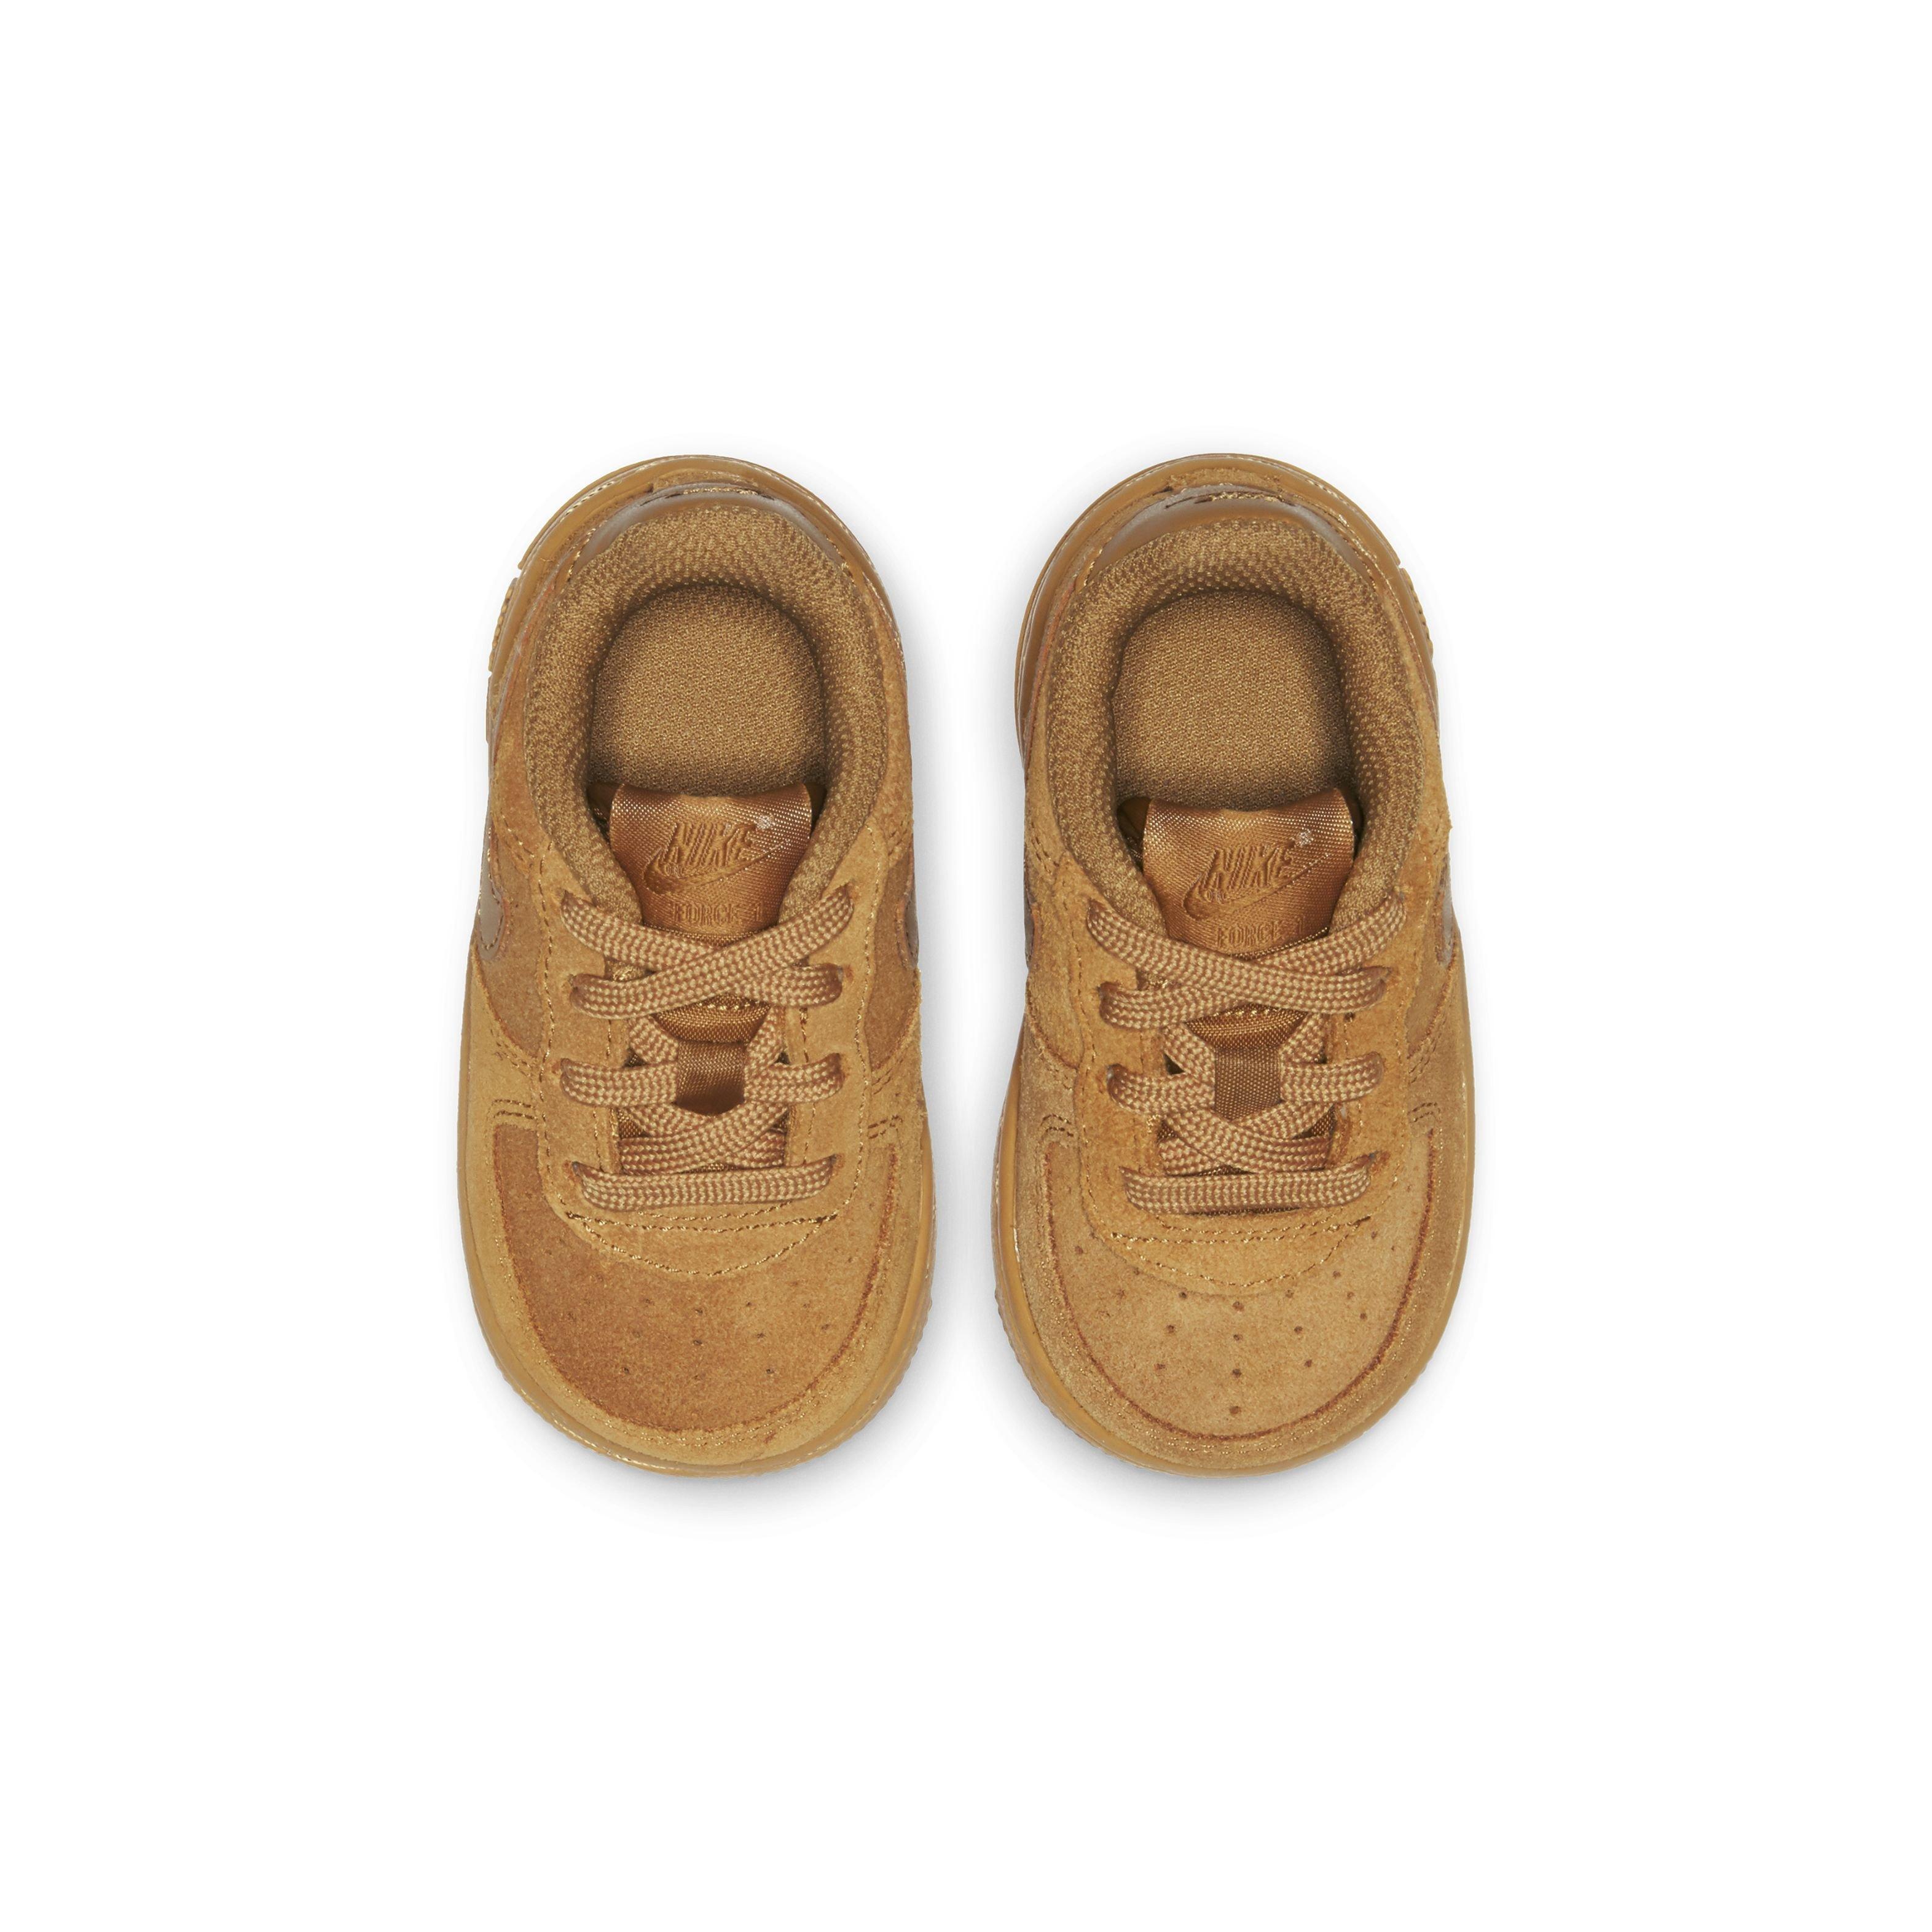 wheat forces infant